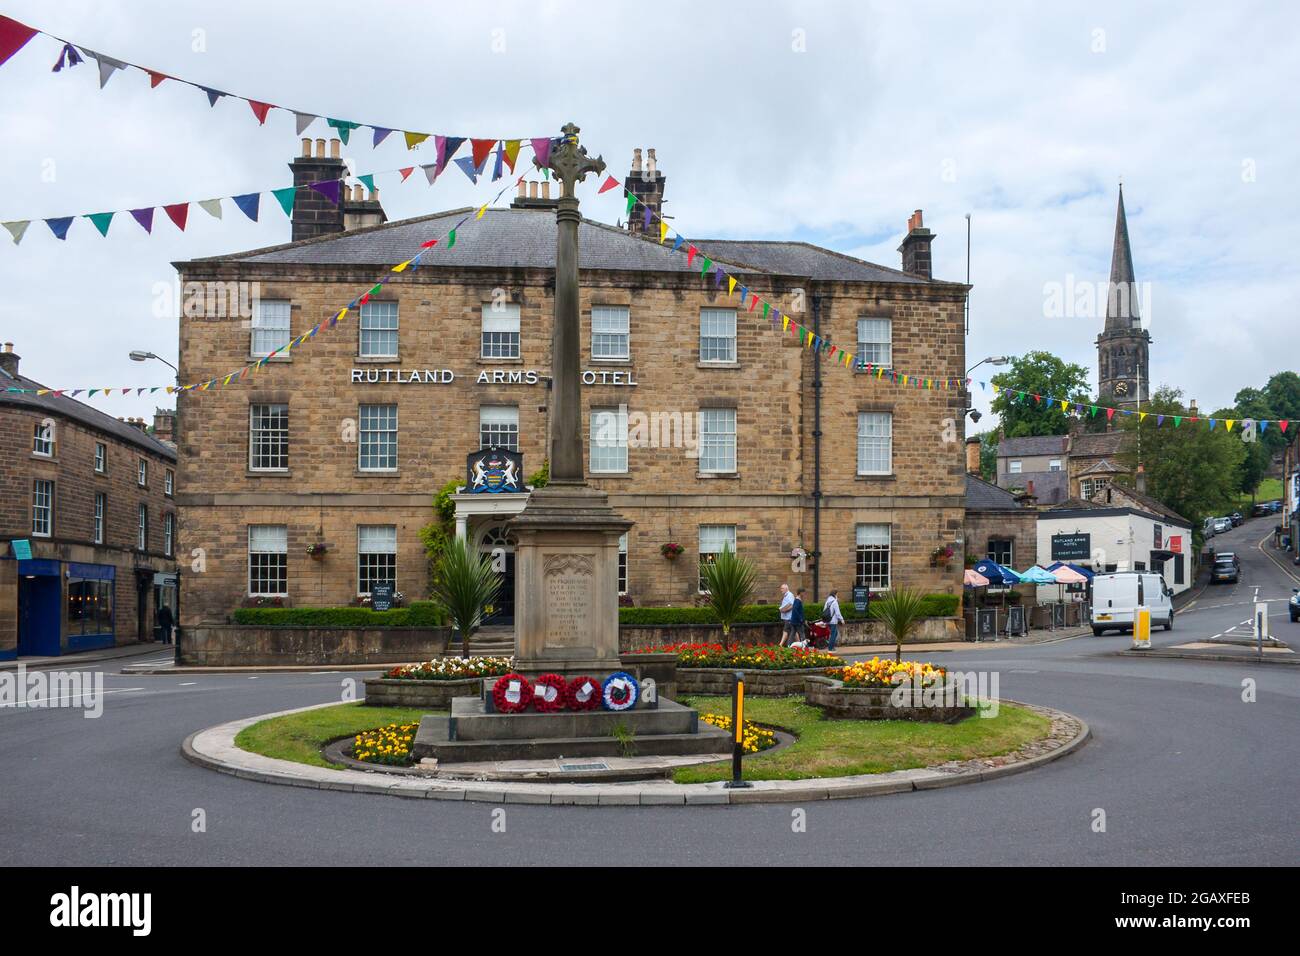 The Rutland Arms Hotel, Bakewell, Derbyshire Stock Photo